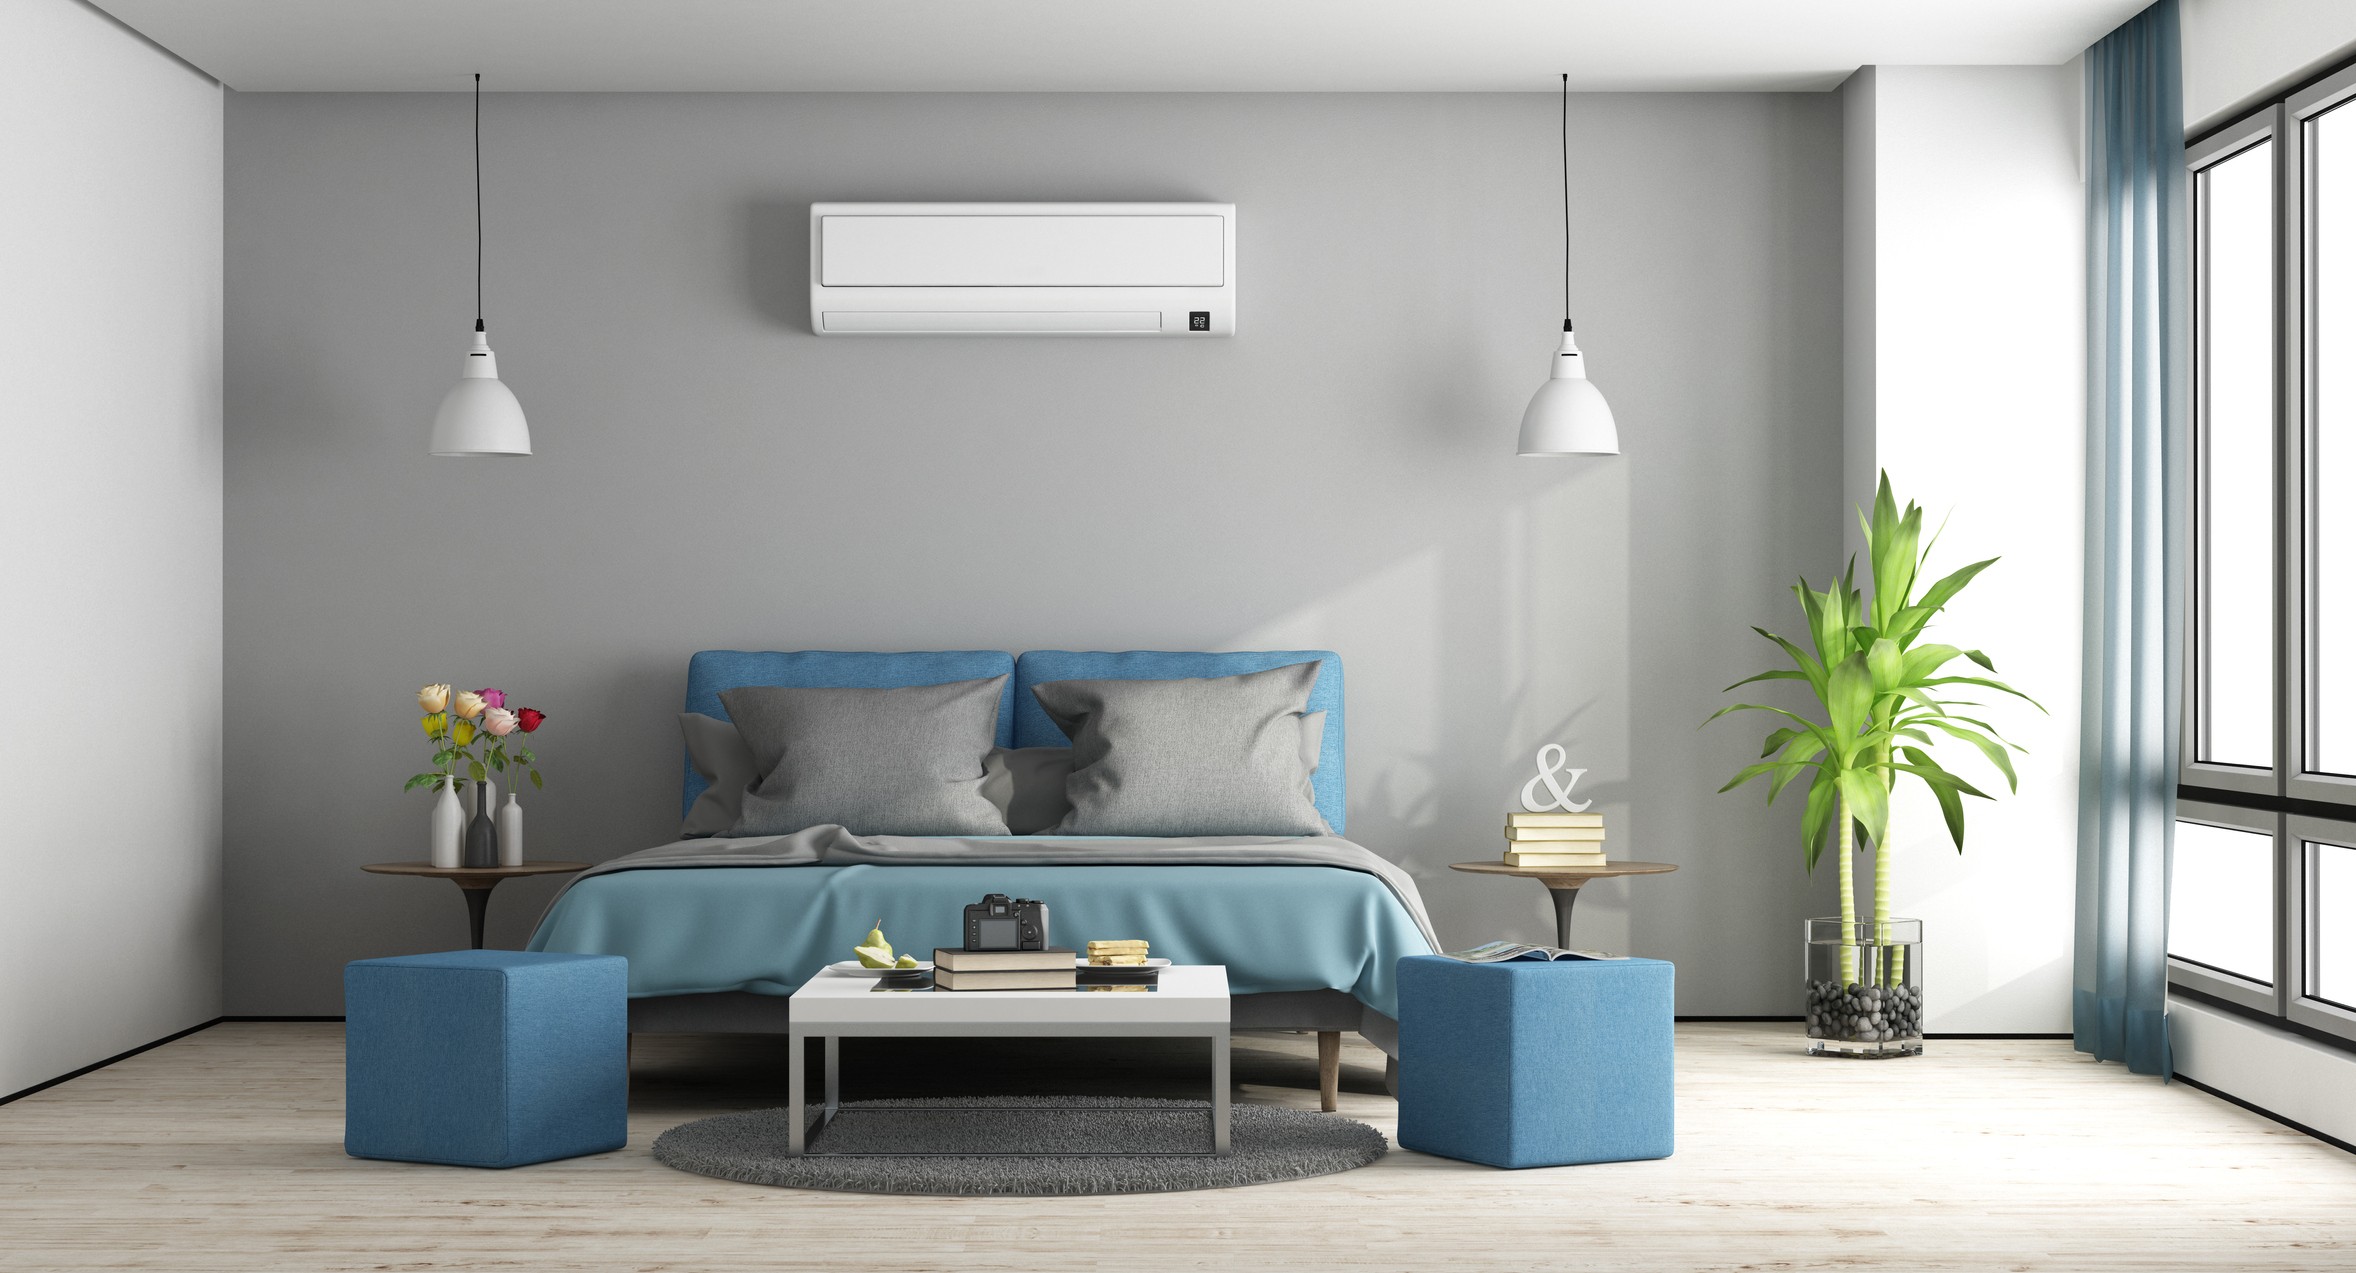 Silent is Golden - The Mitsubishi Electric MSZ-GL Ductless Heat Pump